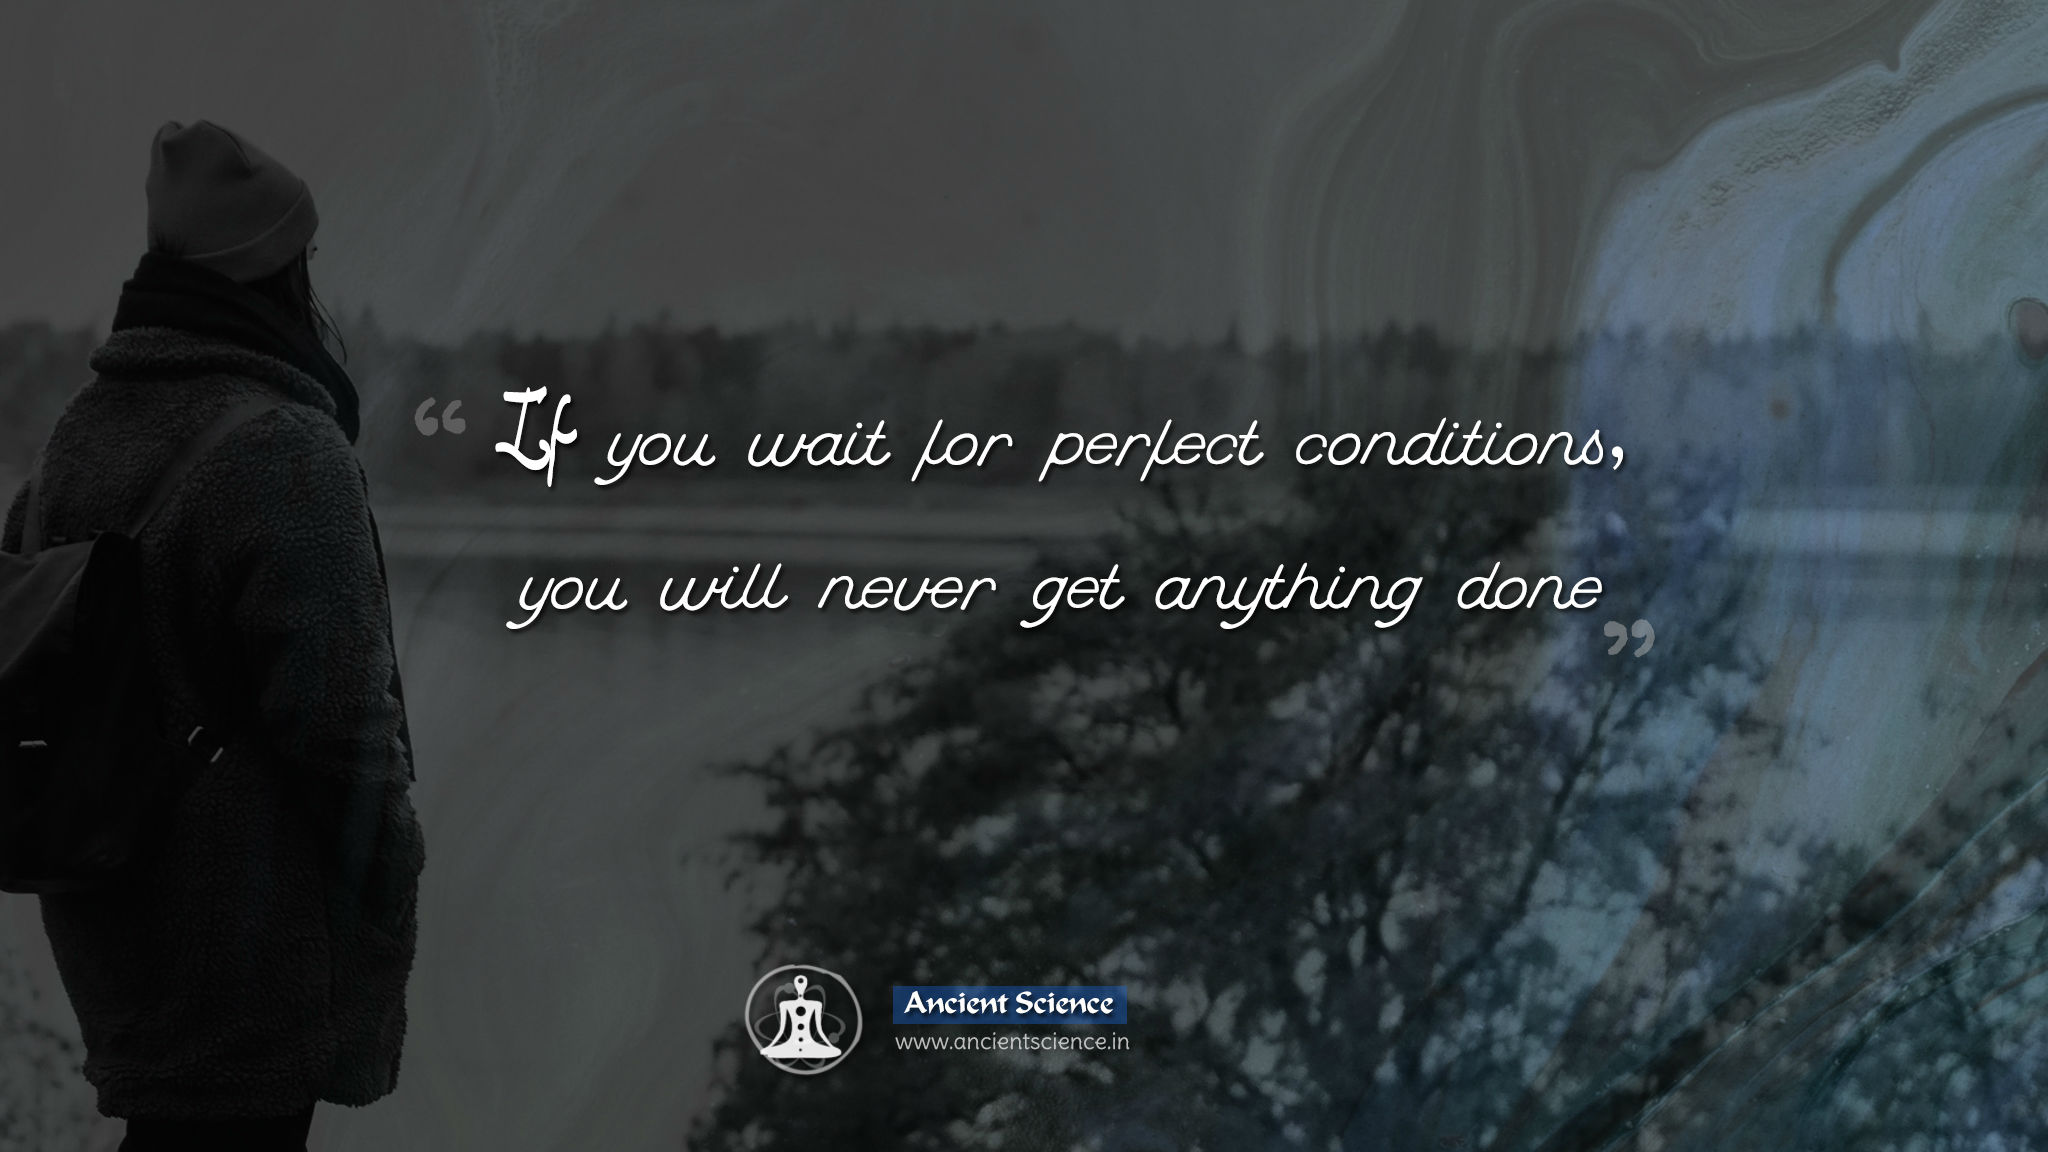 If you wait for perfect conditions, you will never get anything